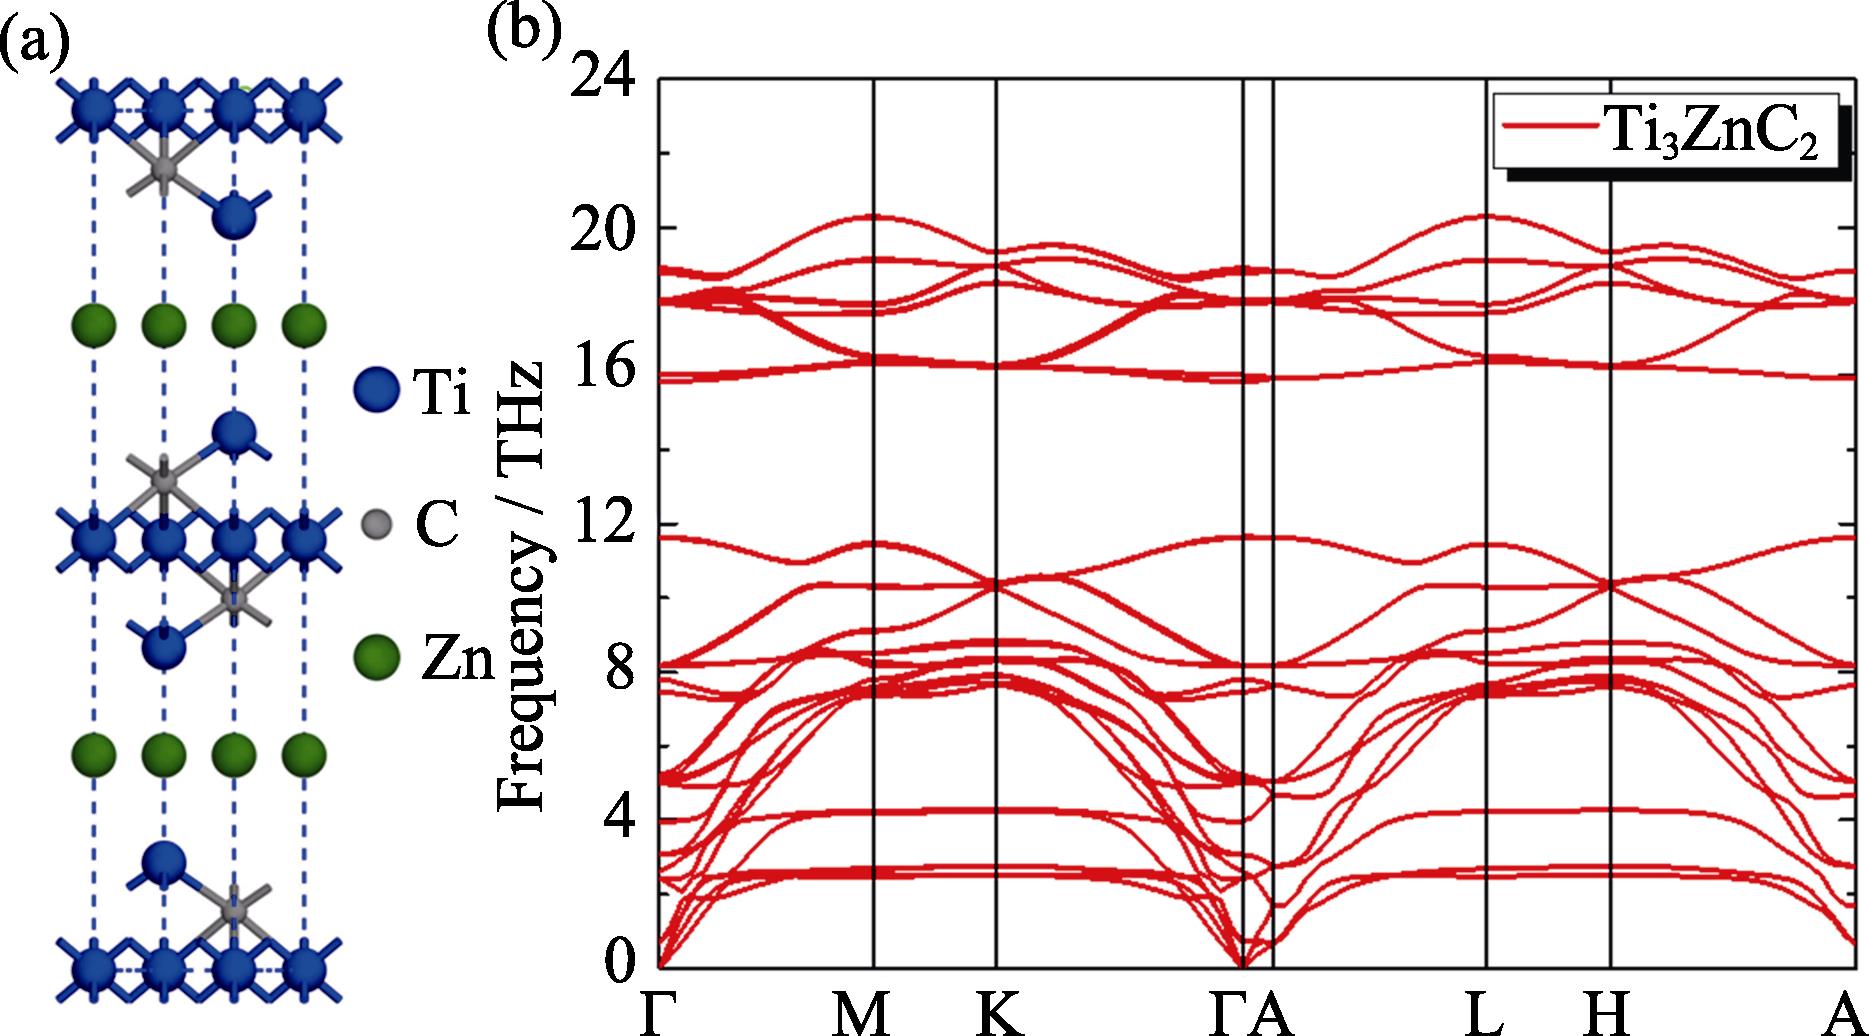 (a) The unit cell and (b) phonon spectra of Ti3ZnC2